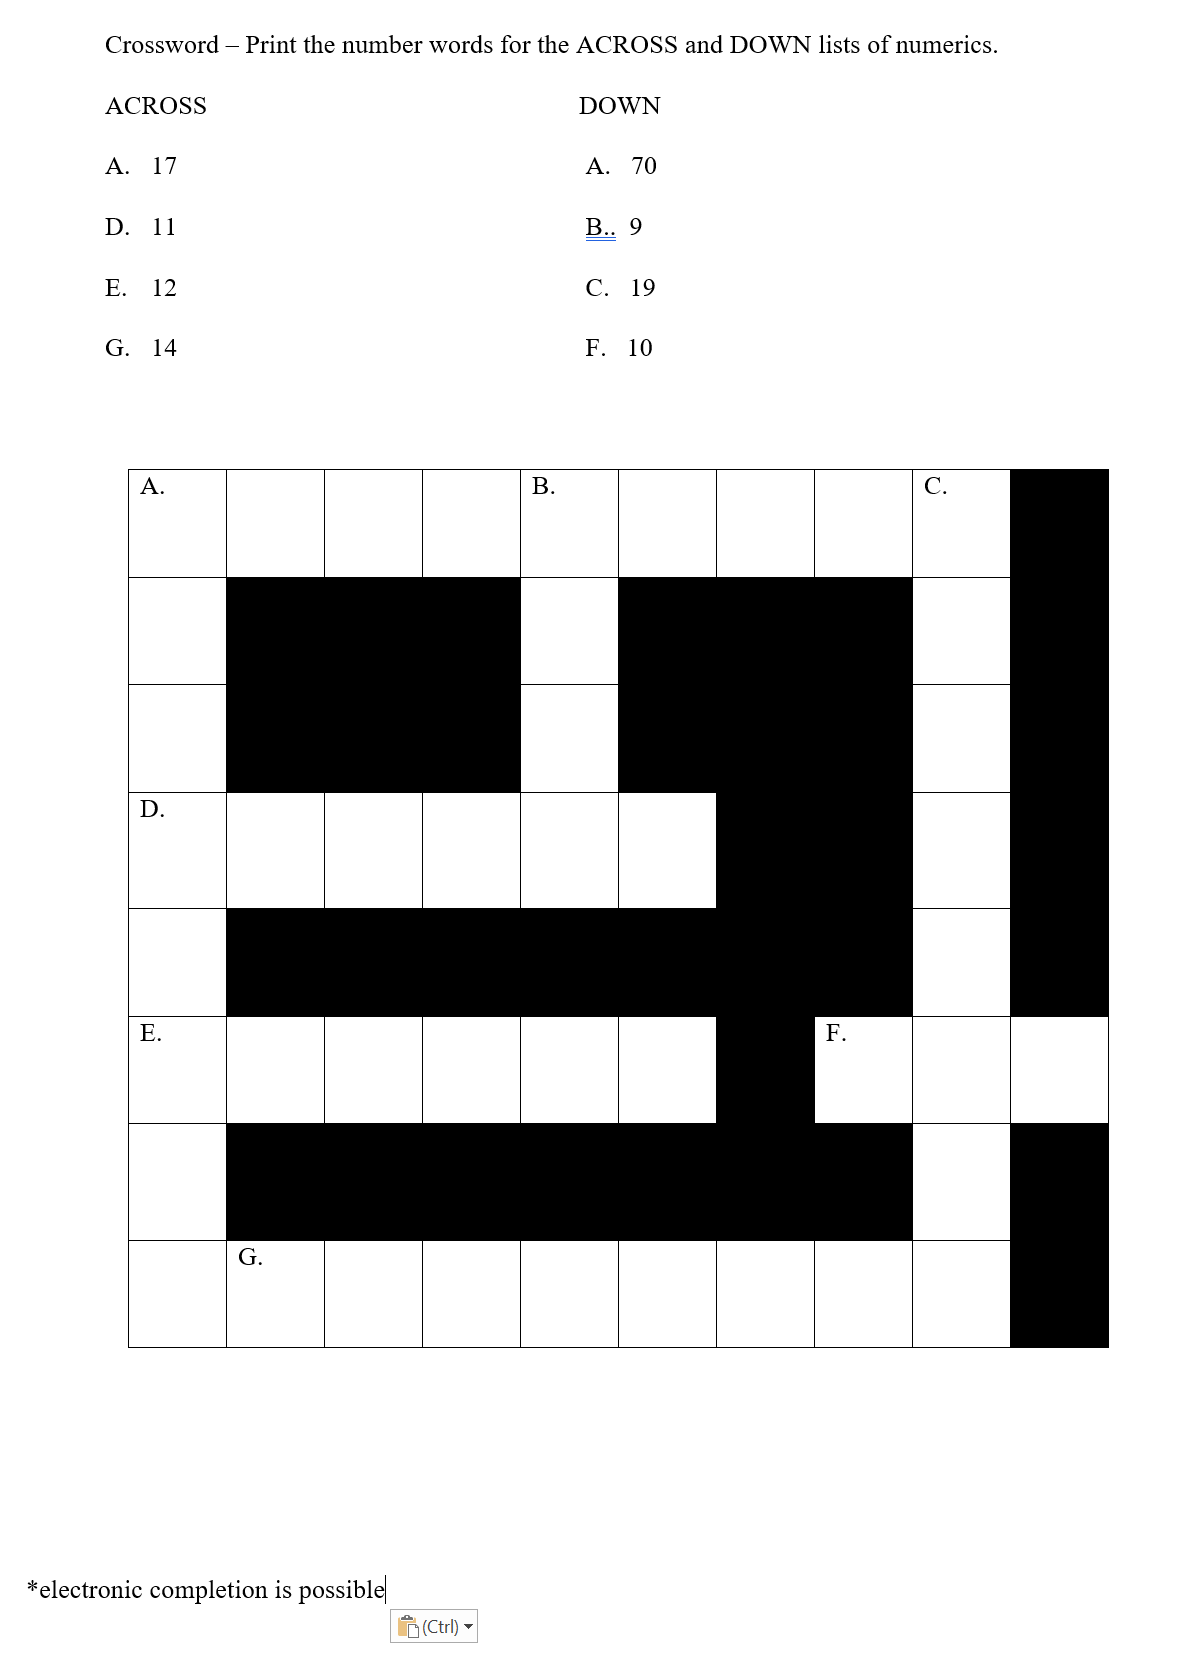 crossword puzzle re_ numberic to word representation pg 1 of 2